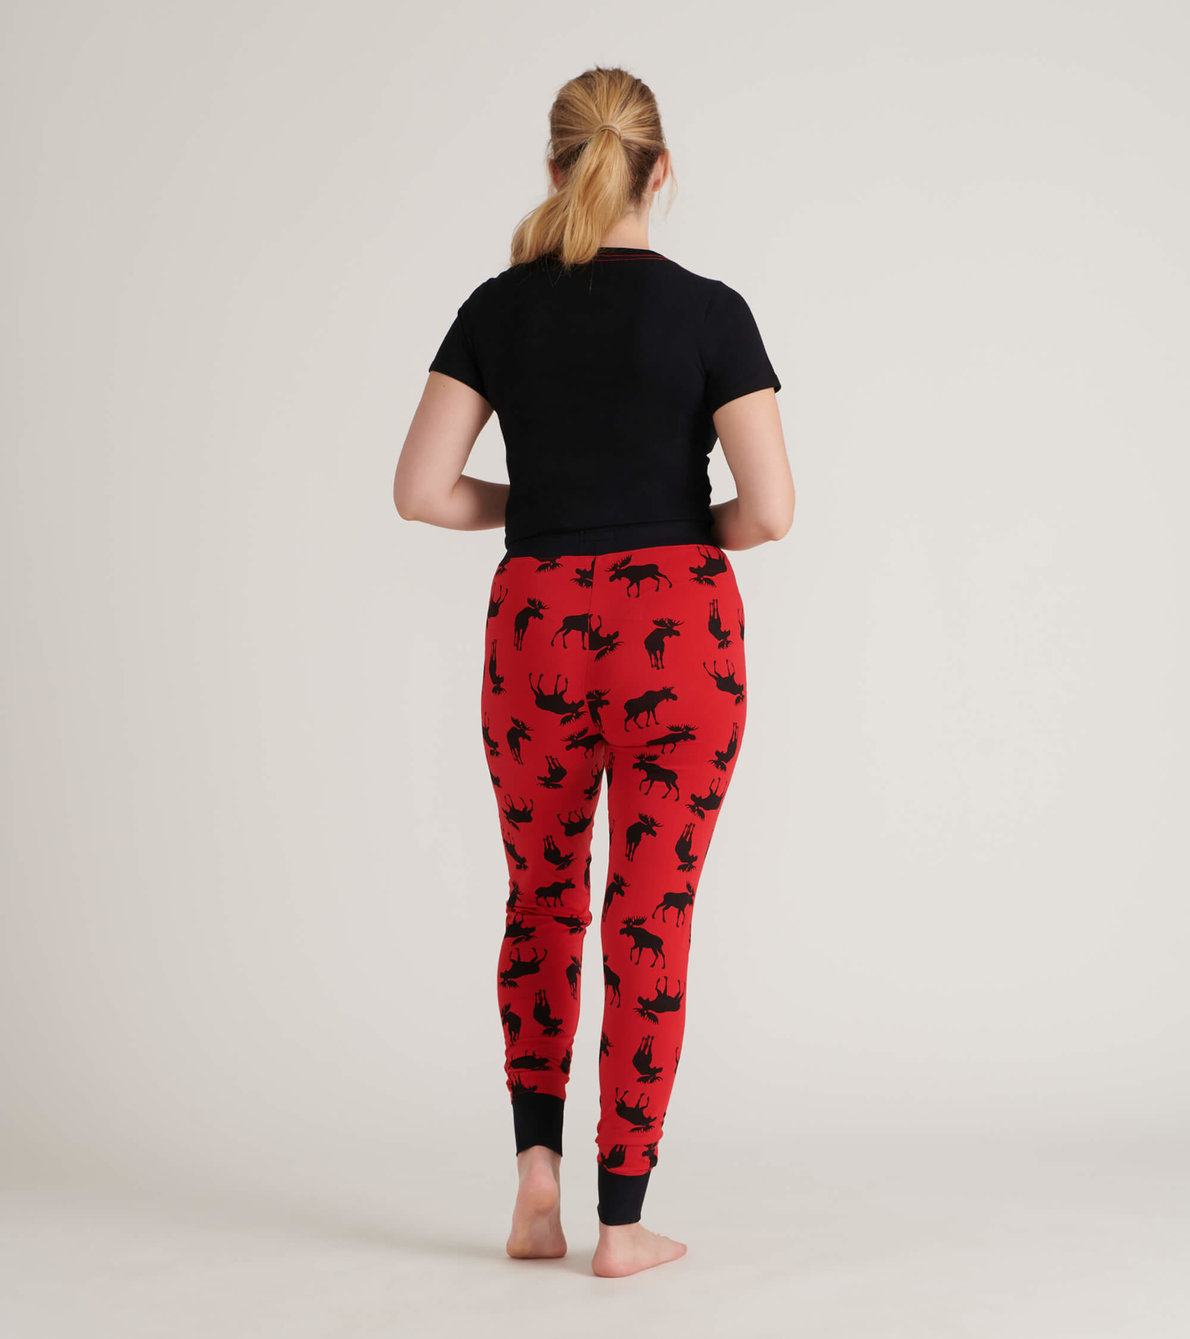 View larger image of Moose on Red Women's Tee and Leggings Pajama Separates